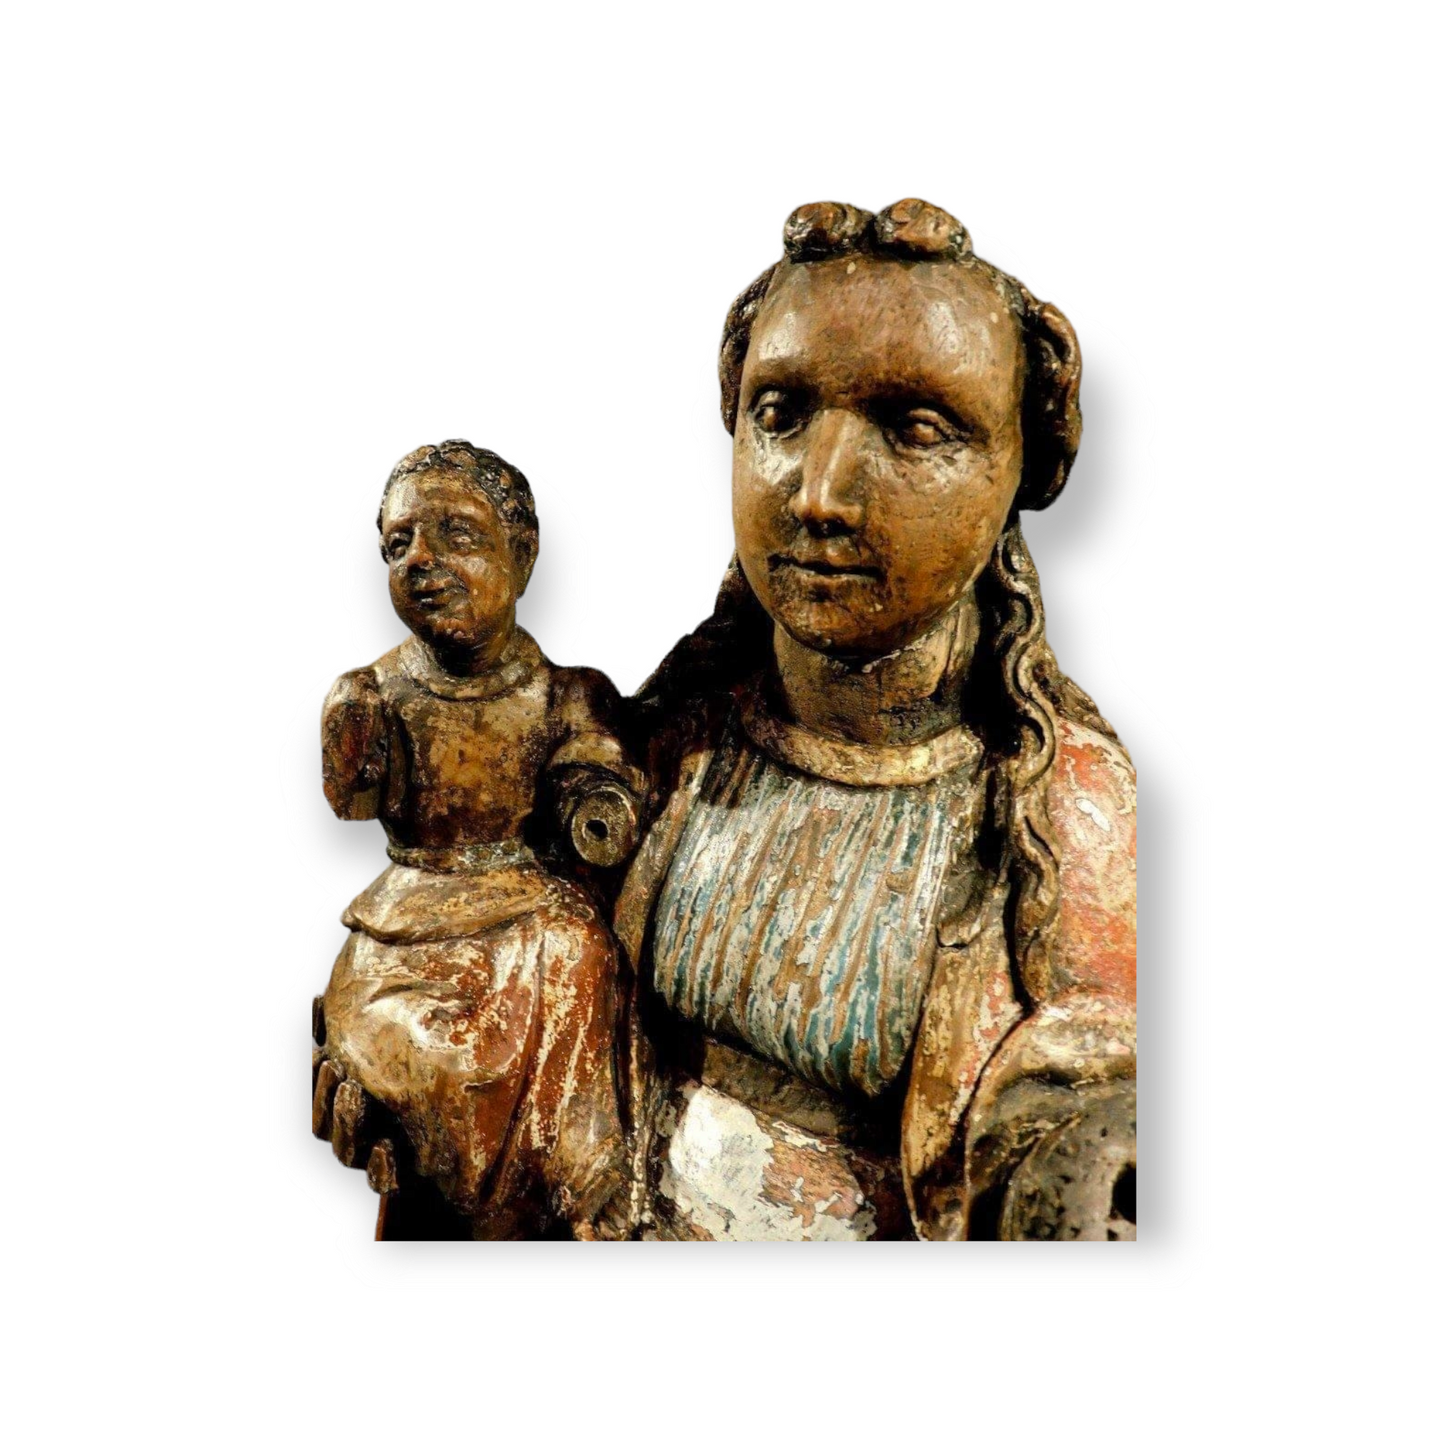 Late 15th Century German Antique Carved Oak Sculpture Of The Virgin Mary And Child